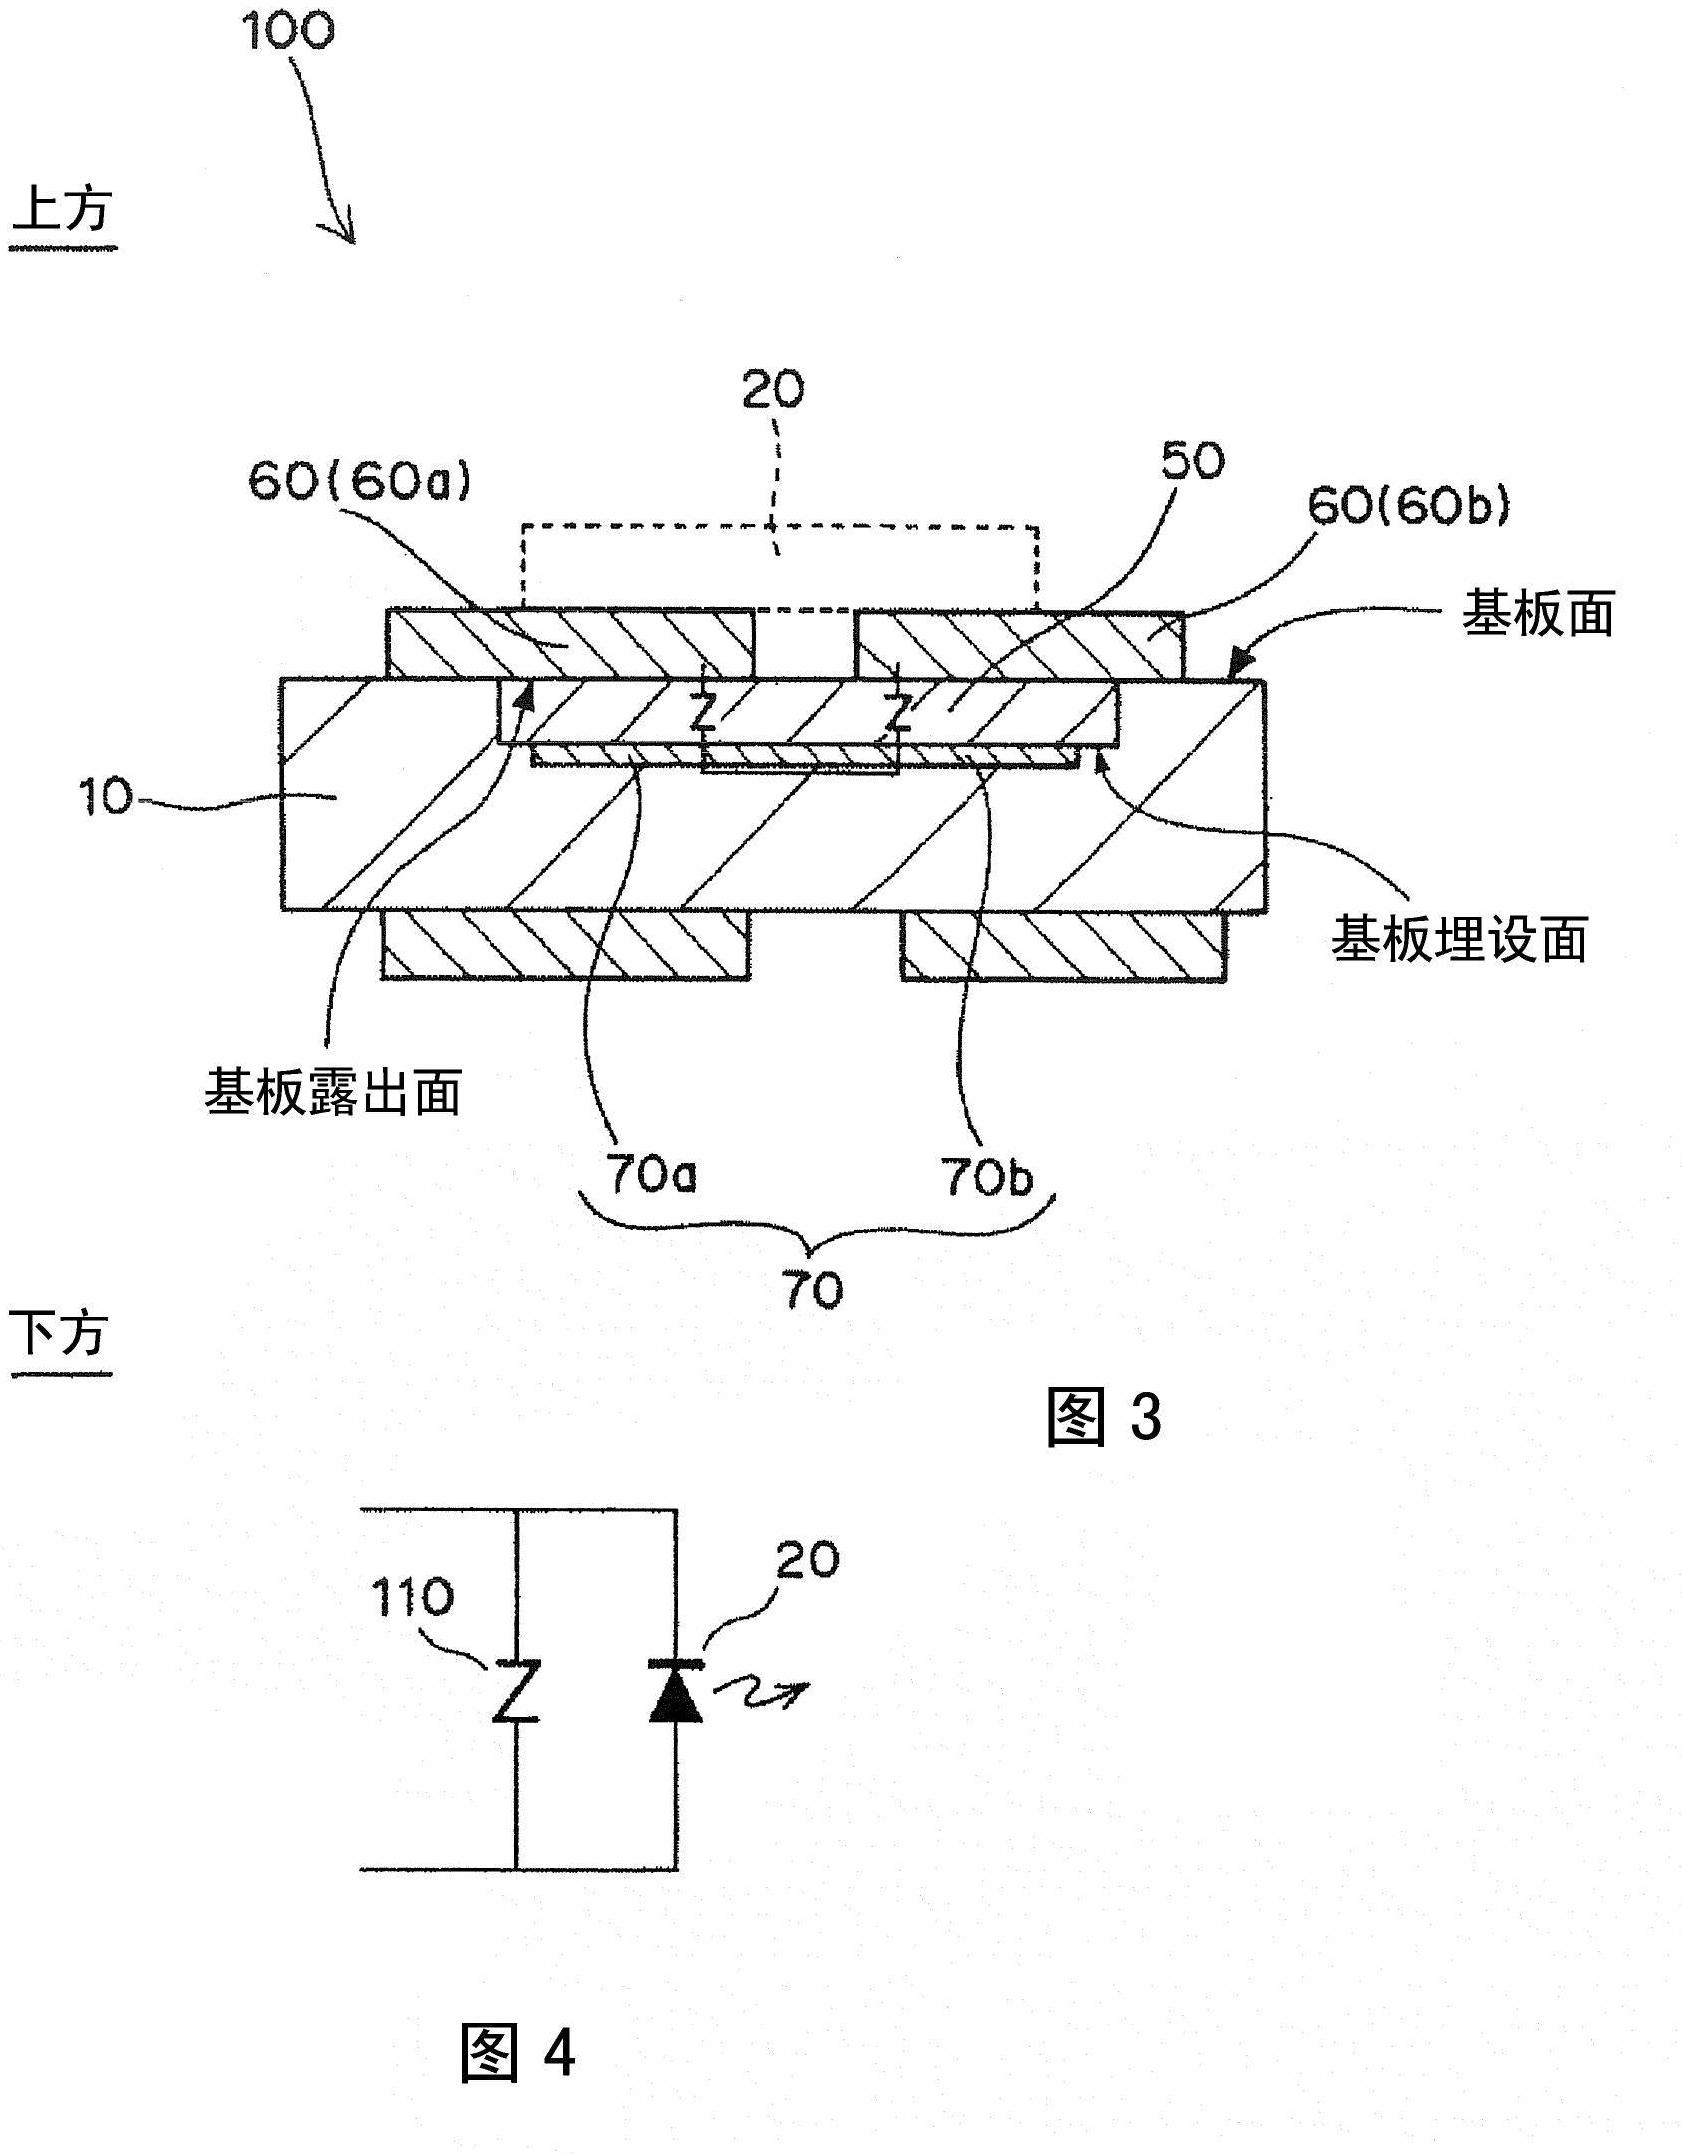 Substrate for light emitting element, method for manufacturing same, and light emitting device